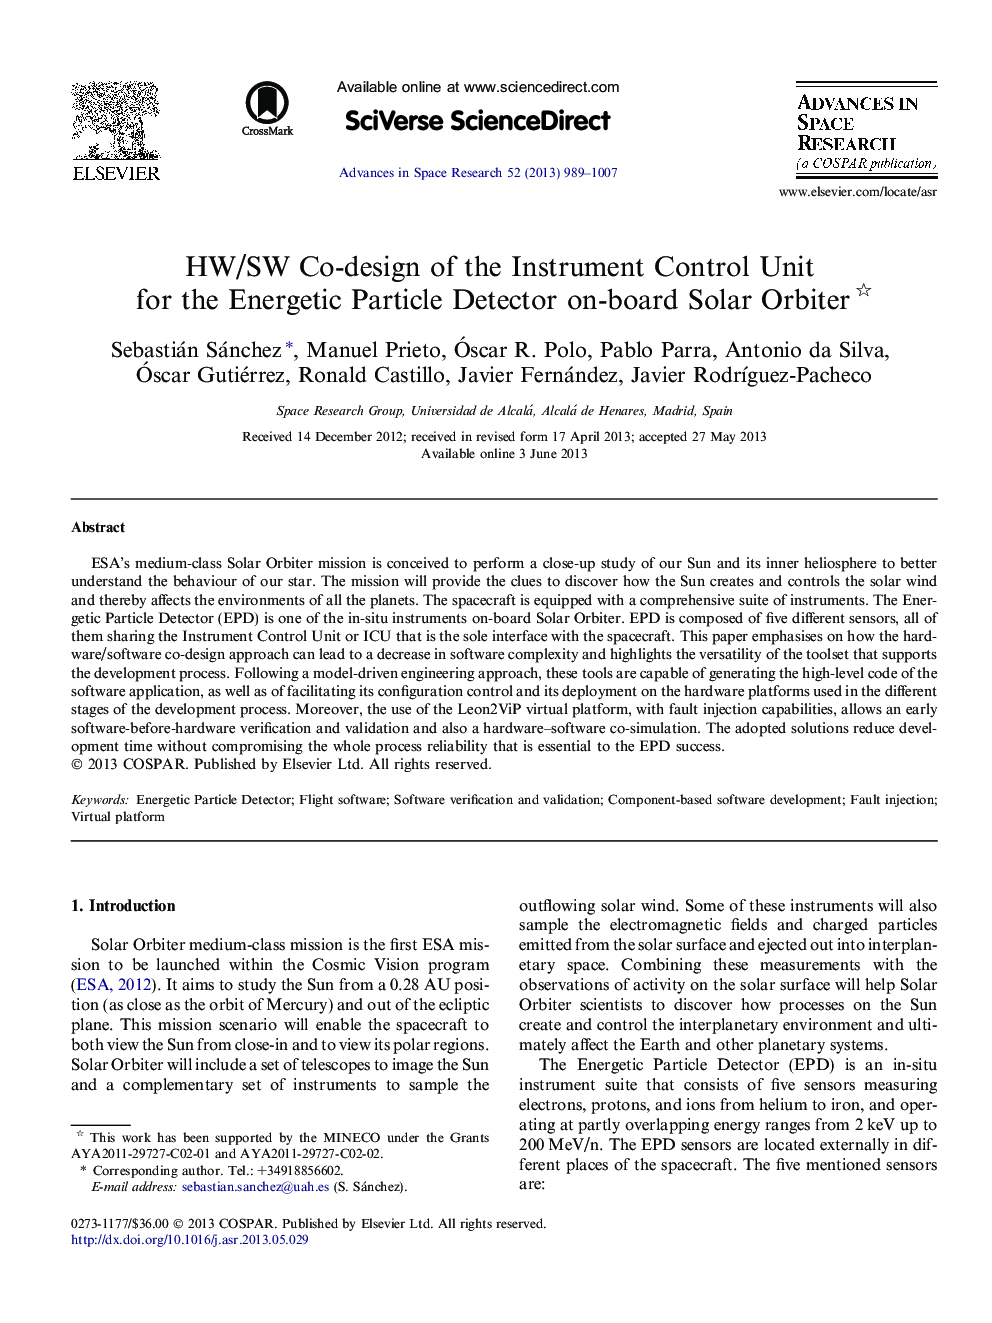 HW/SW Co-design of the Instrument Control Unit for the Energetic Particle Detector on-board Solar Orbiter